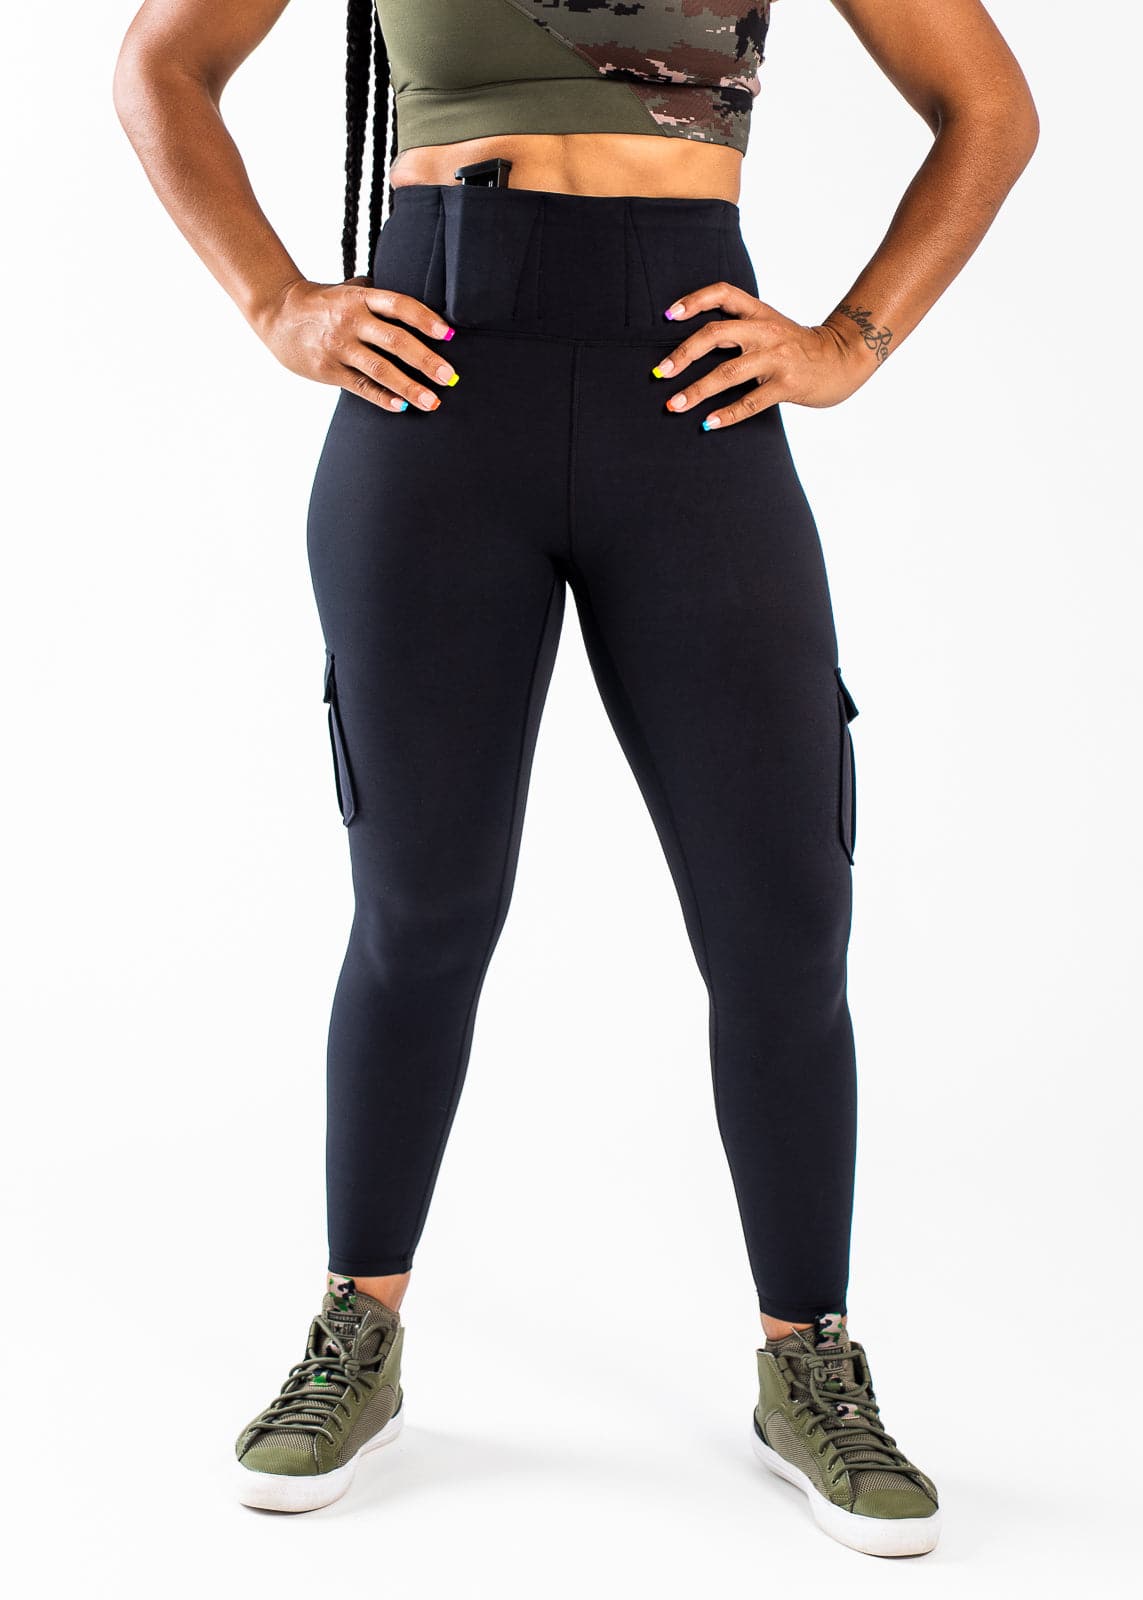 Concealed Carry Leggings With Tactical Pockets Shoulders Down Front View with Hands on Sides | Black